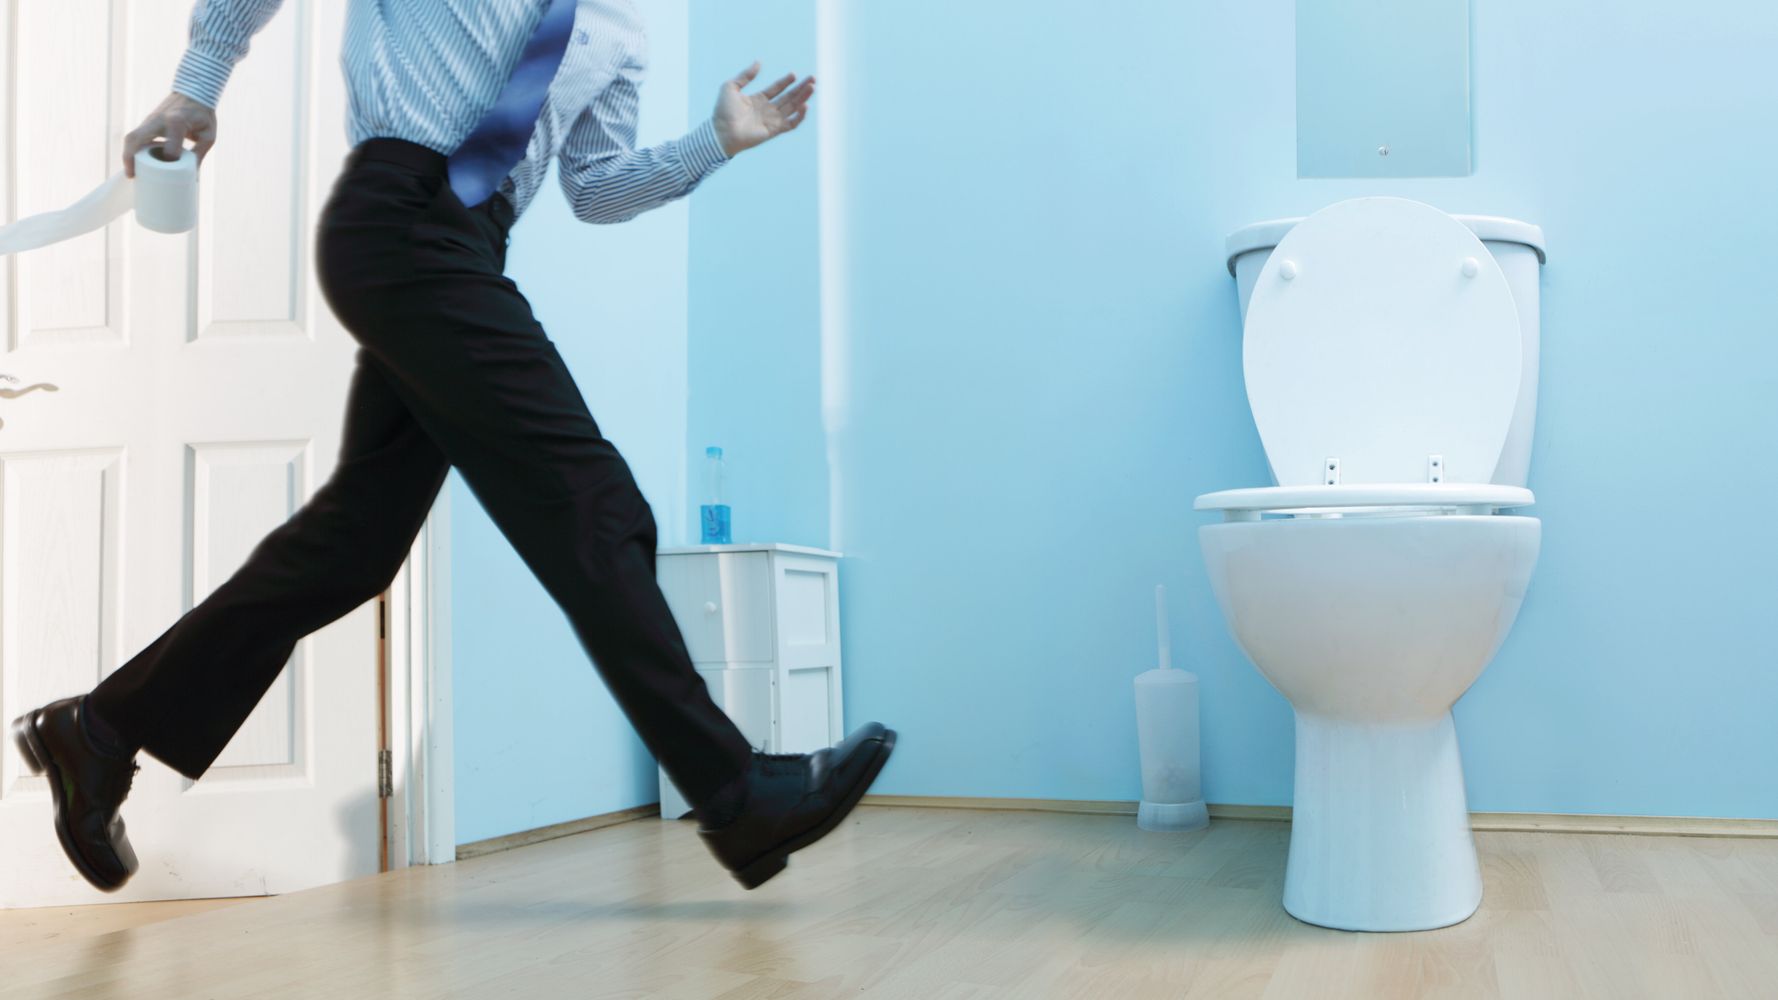 How To Make Yourself Pee When You Can't Go - Tips That Really Work